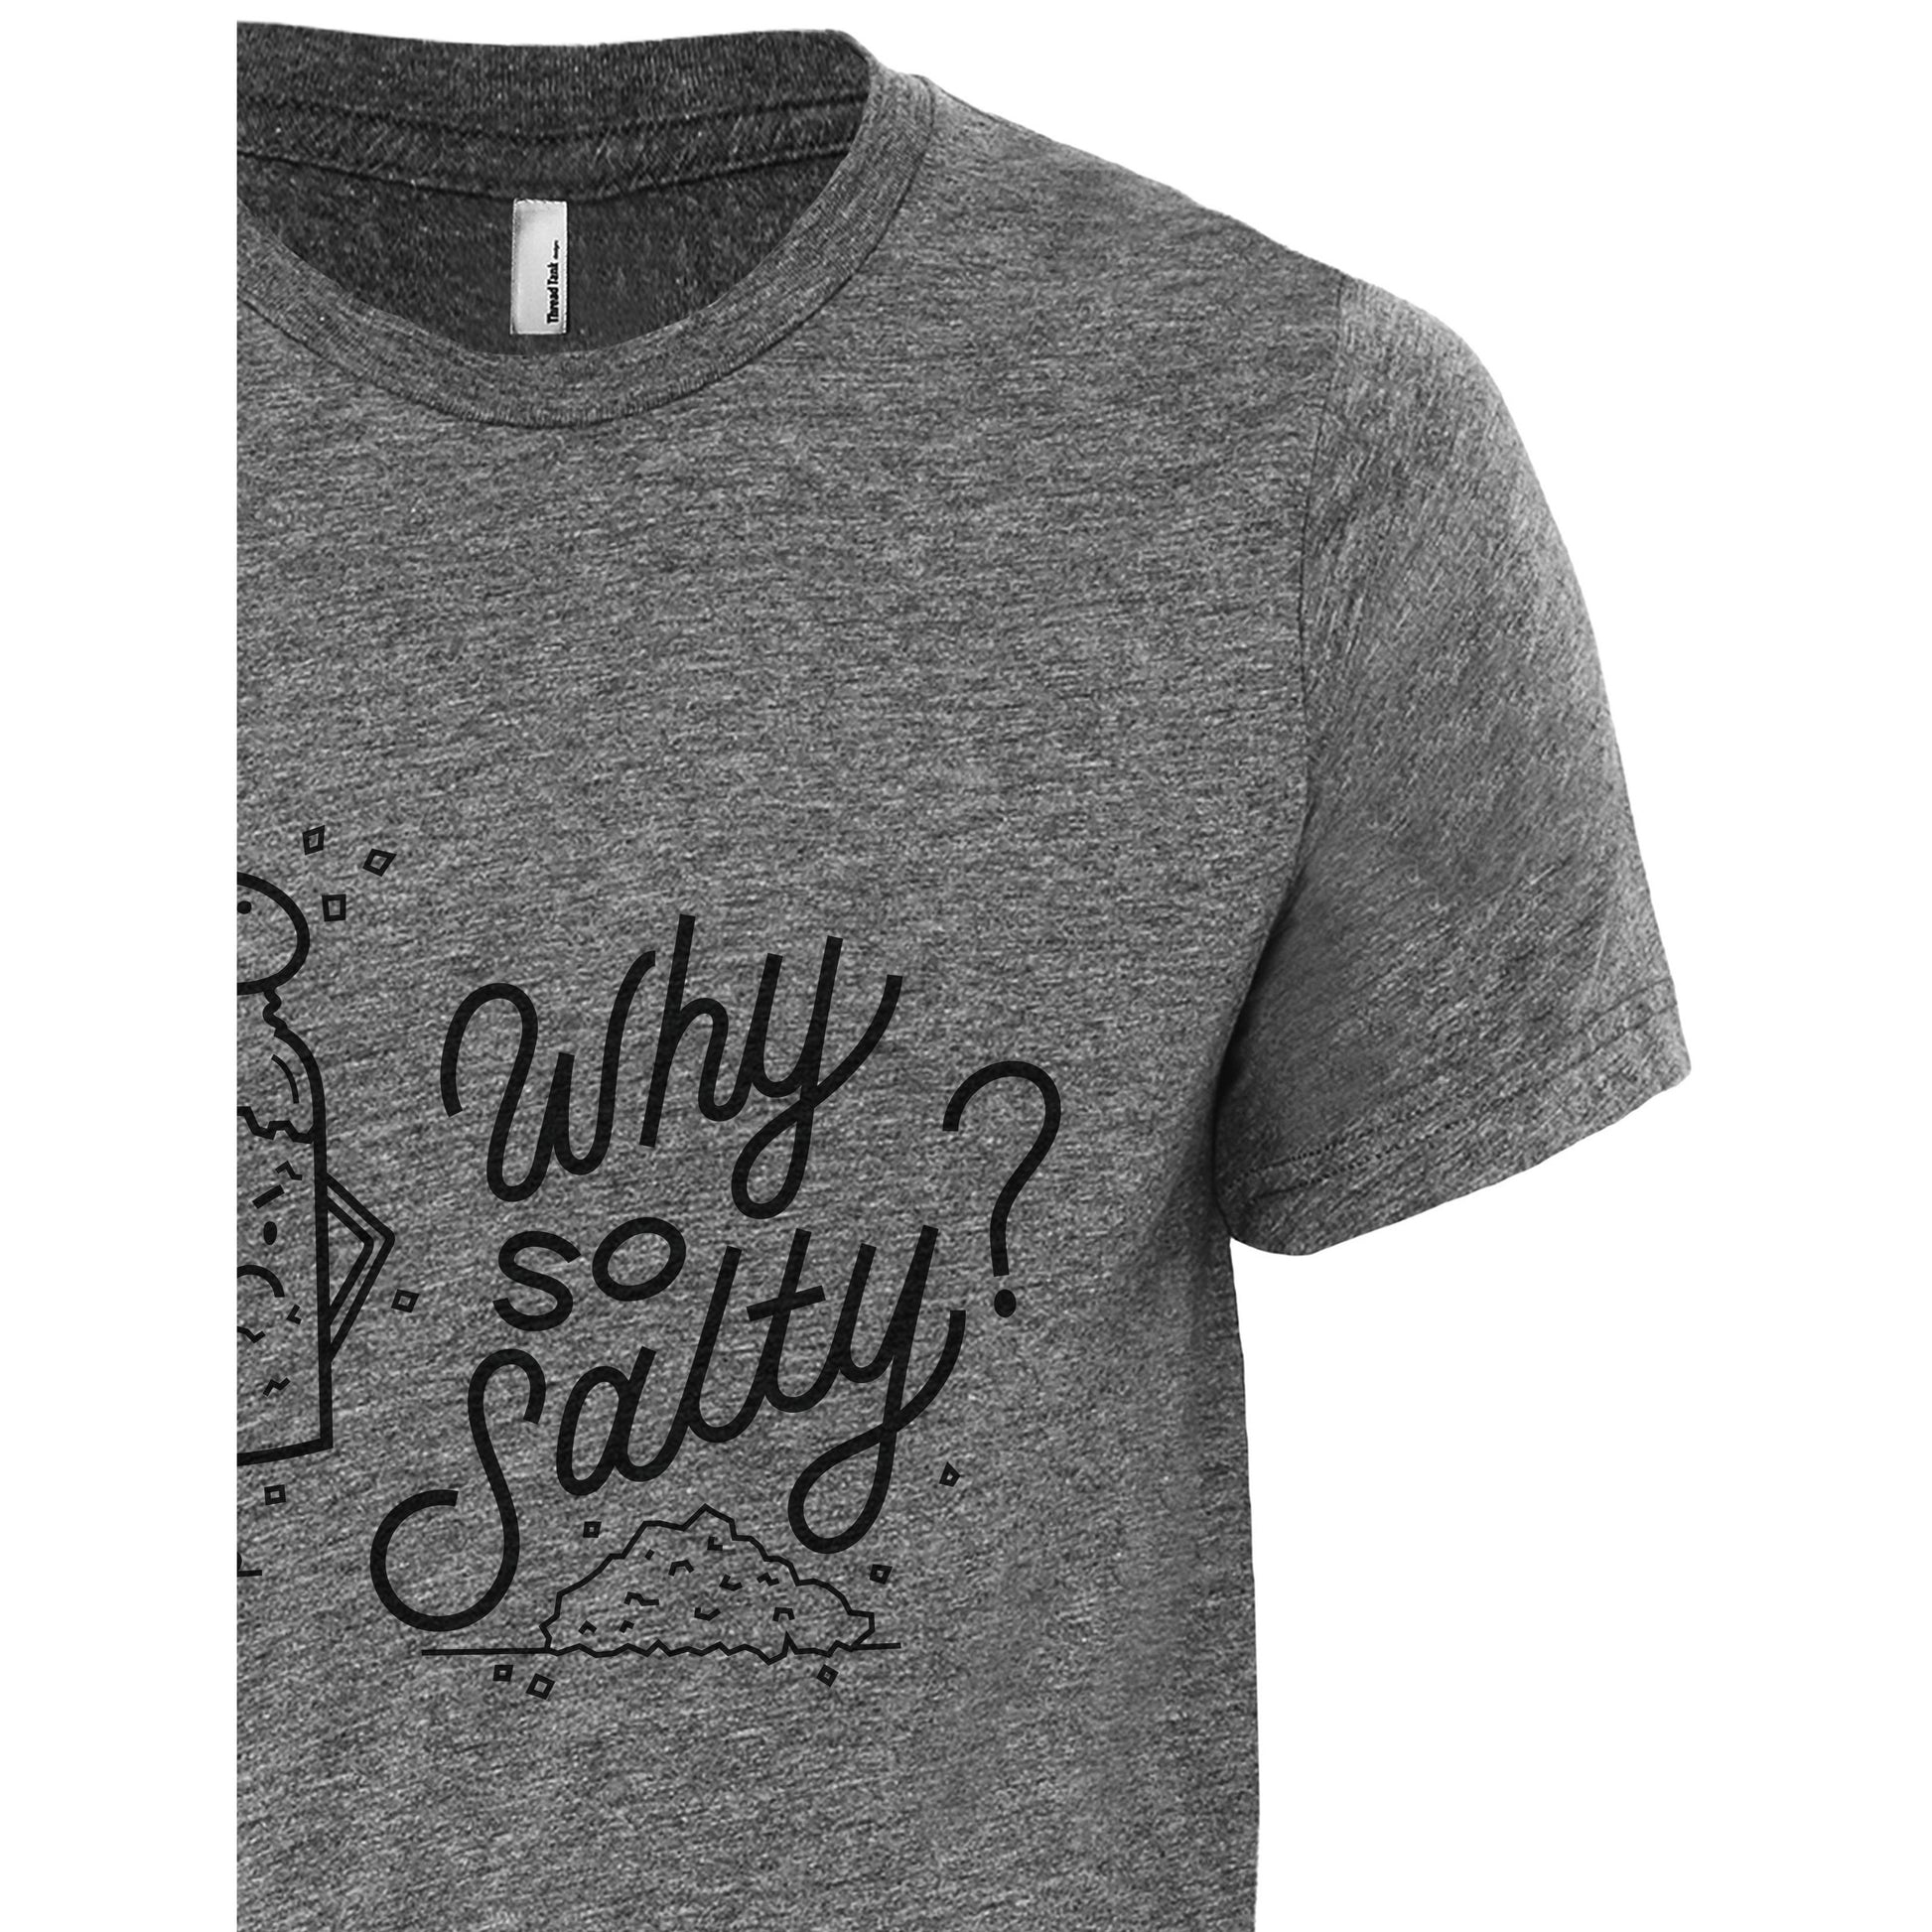 Why So Salty - Stories You Can Wear by Thread Tank